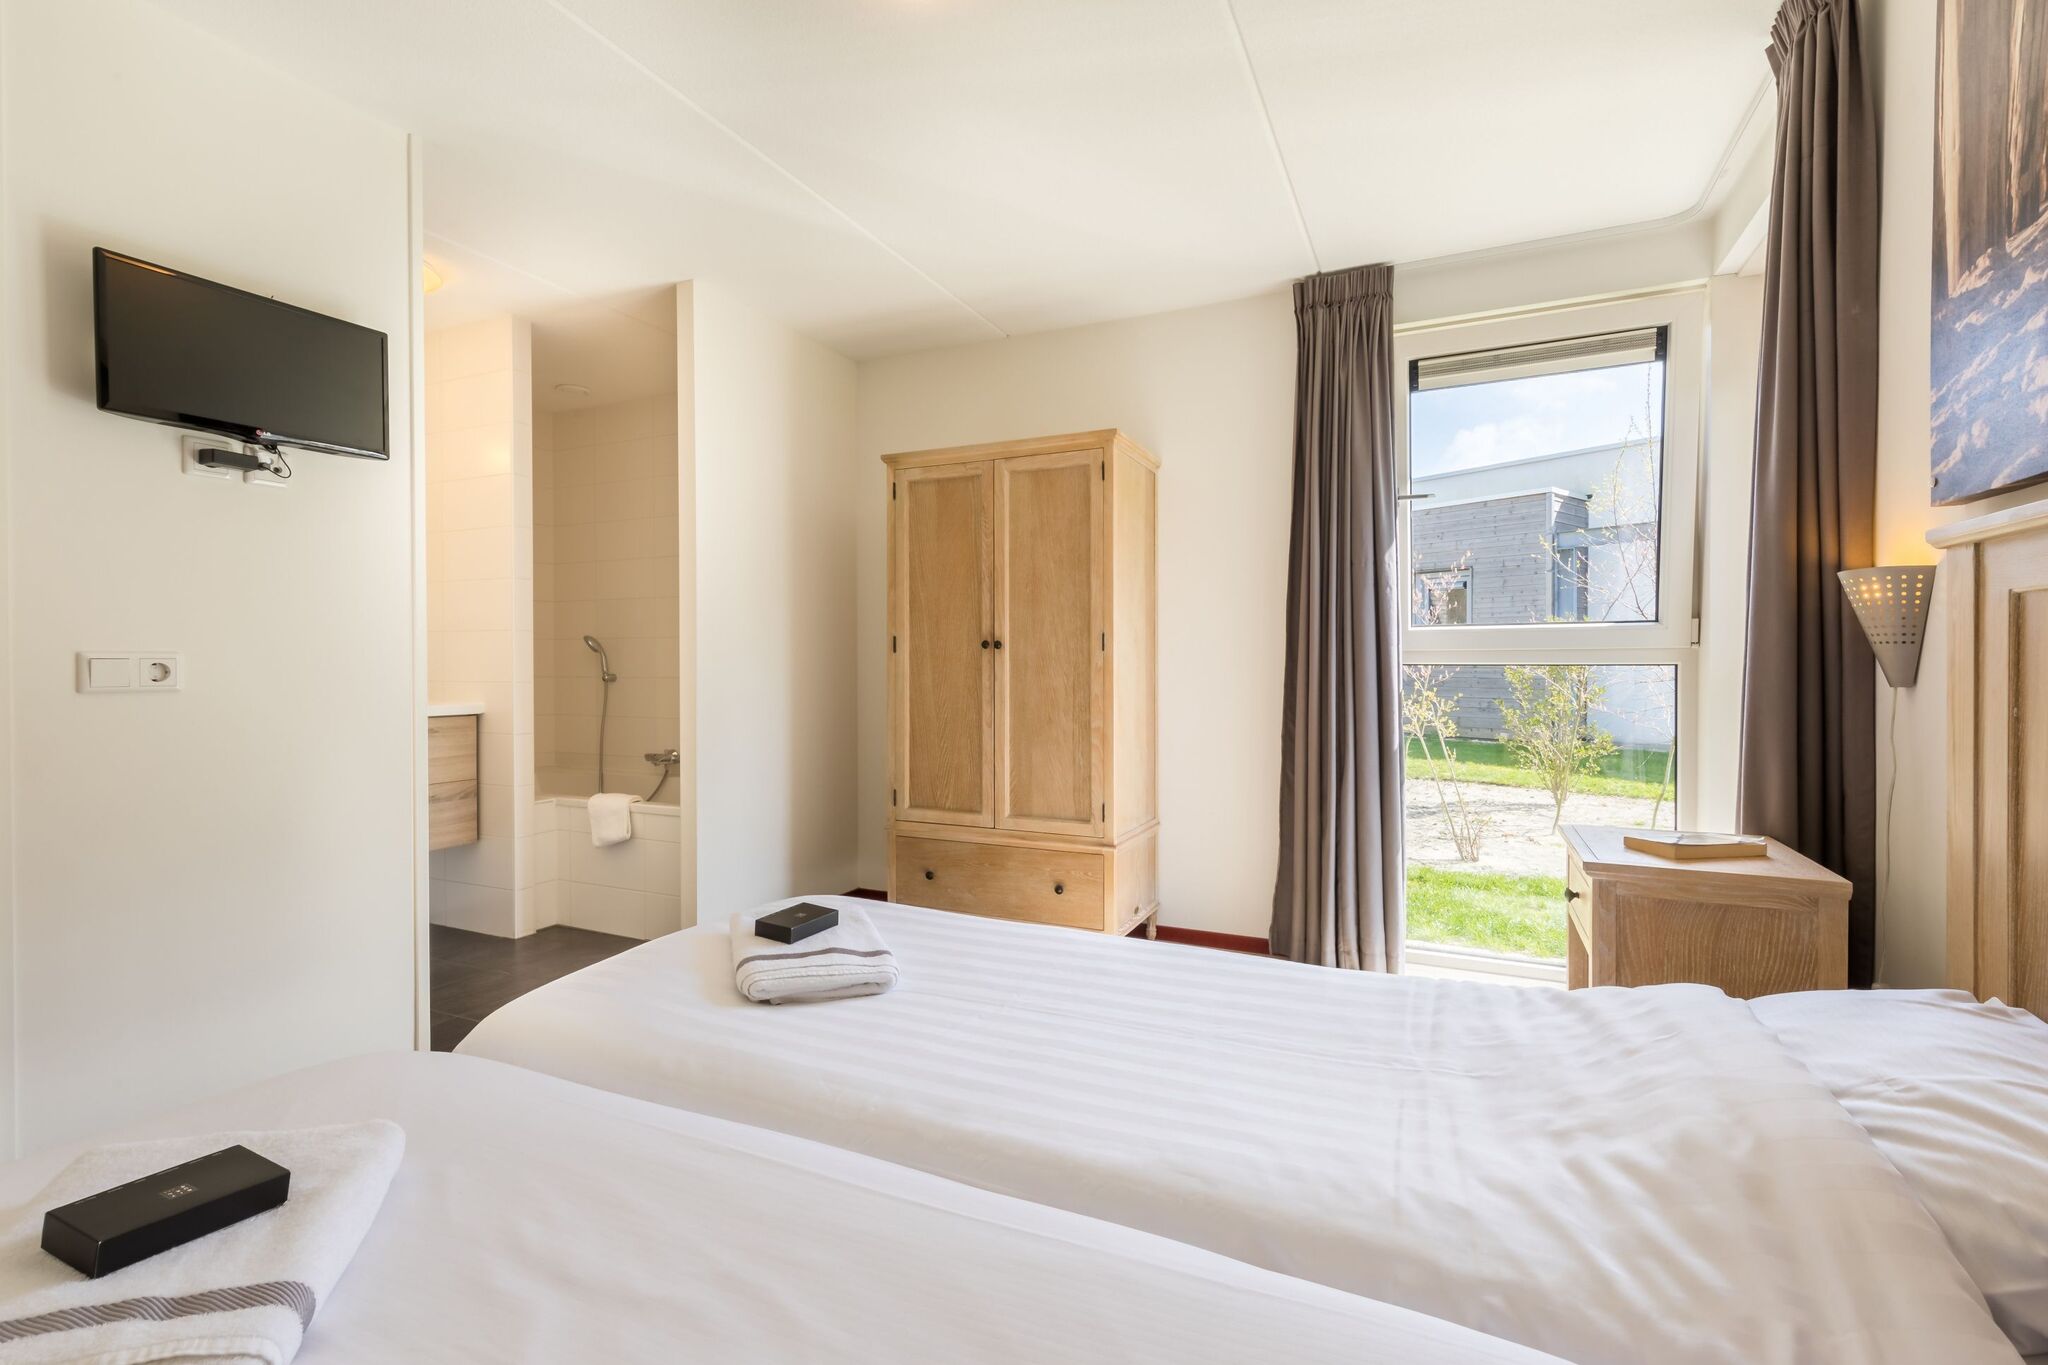 Luxury house, two bathrooms, on Texel, sea at 2km